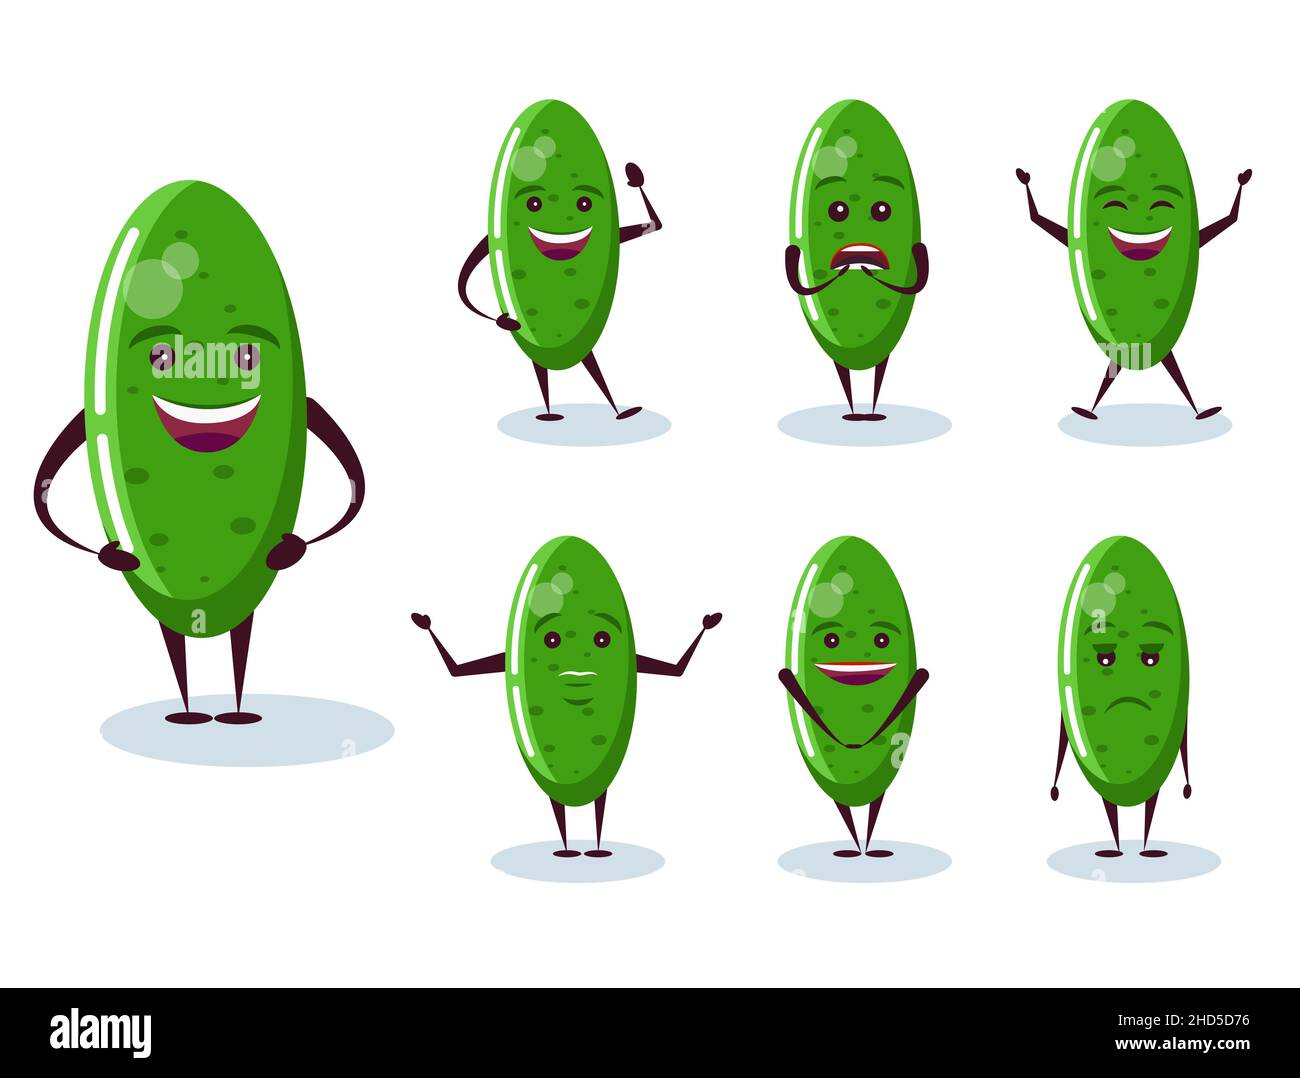 Cucumber set - character and emotions. Anthropomorphic hero. Vector illustration in cartoon style. Stock Vector